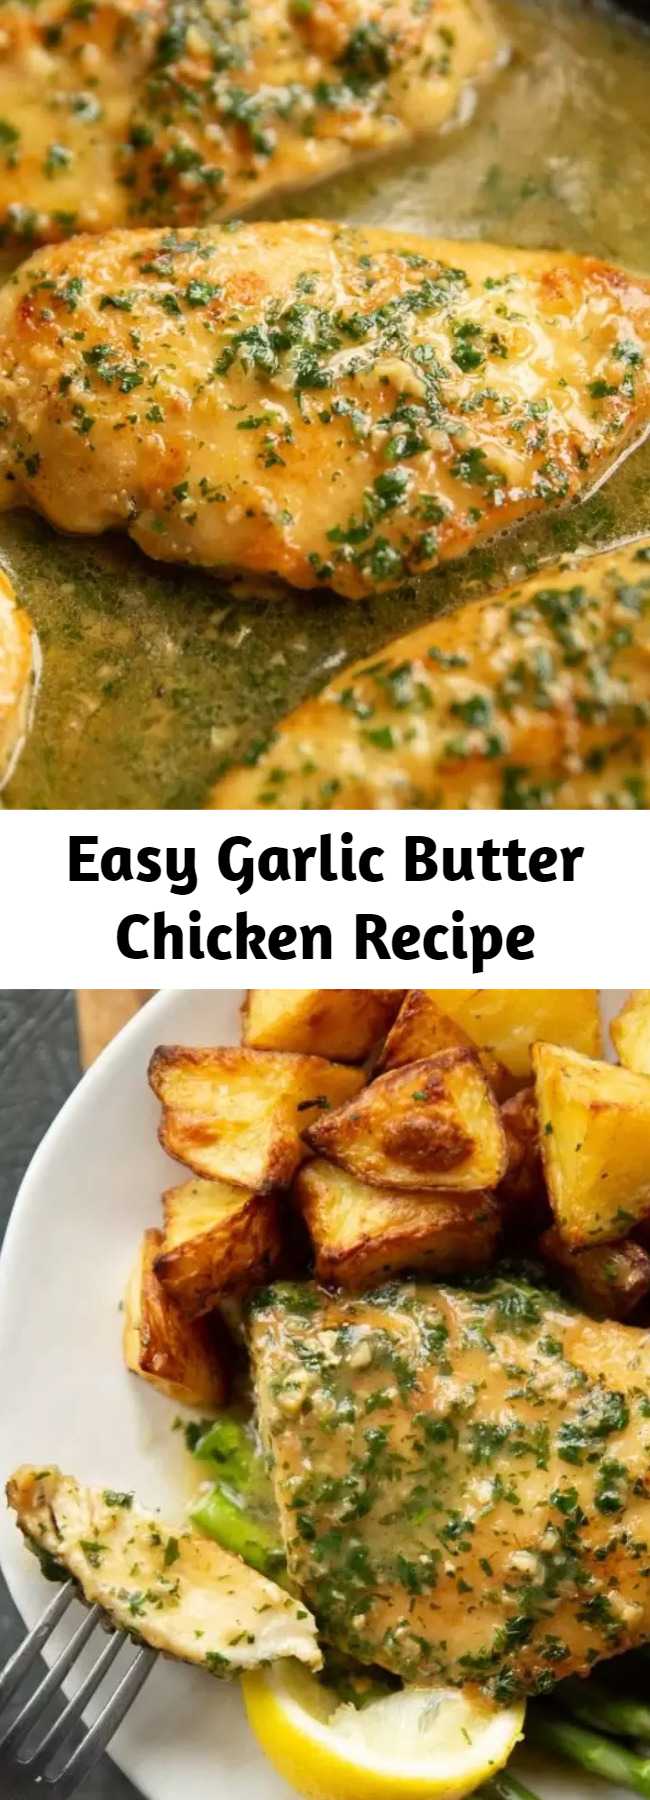 Easy Garlic Butter Chicken Recipe - This garlic butter chicken is perfect for a quick and easy midweek dinner. It's rich, garlicky and only requires 4 ingredients for the sauce! #garlic #butter #chicken #chickenbreast #dinner